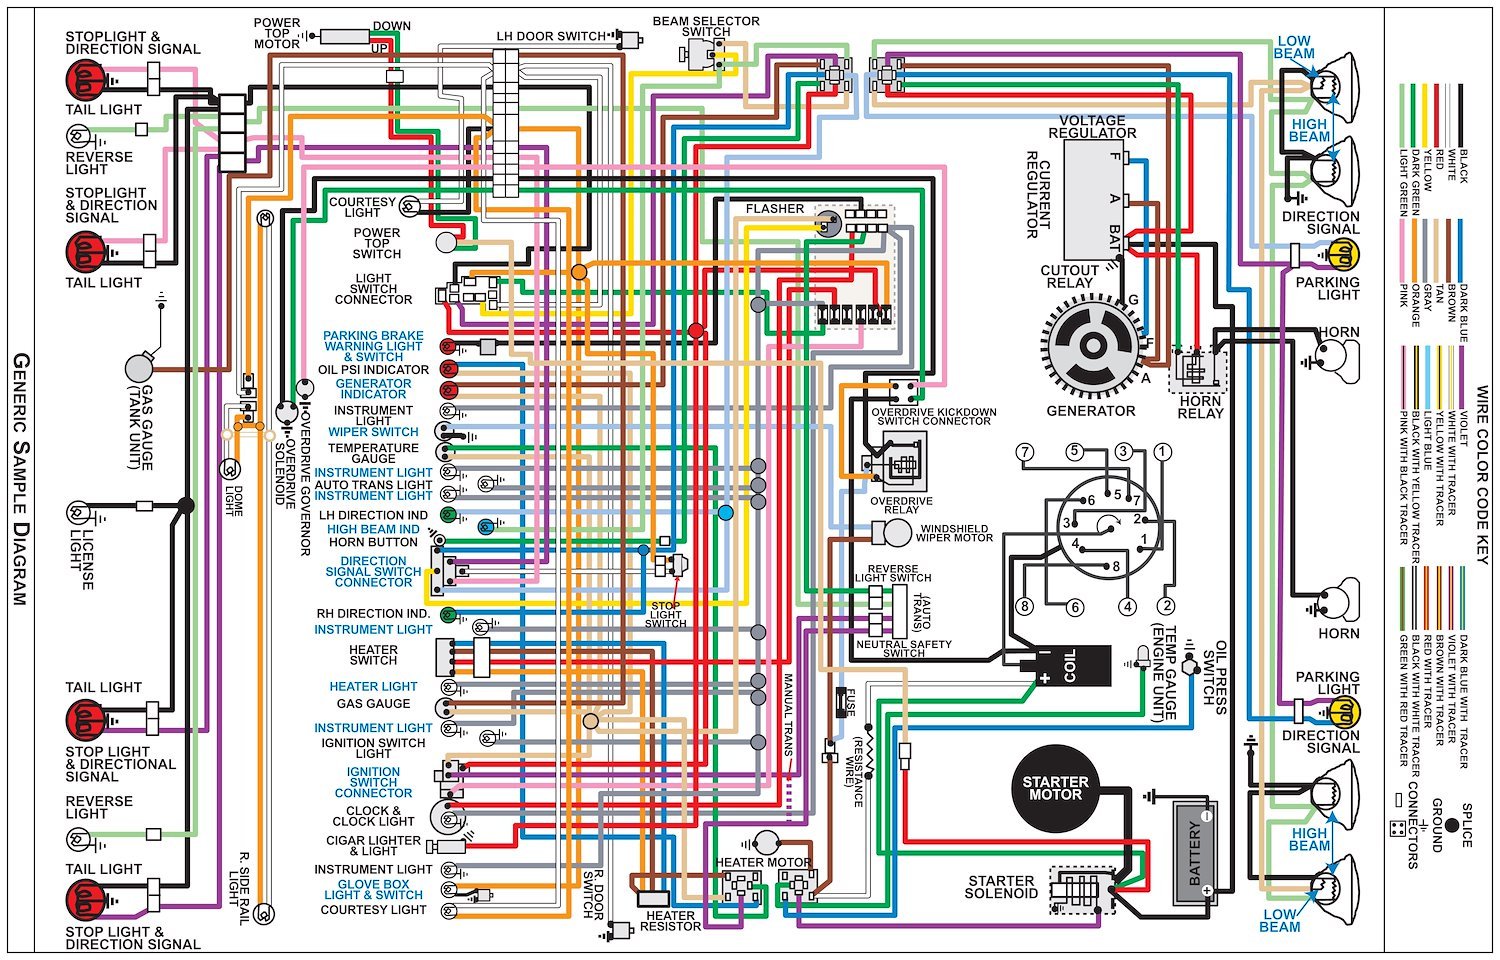 Wiring Diagram for 1969 Chevy Camaro (All Models), 11 in. x 17 in., Laminated